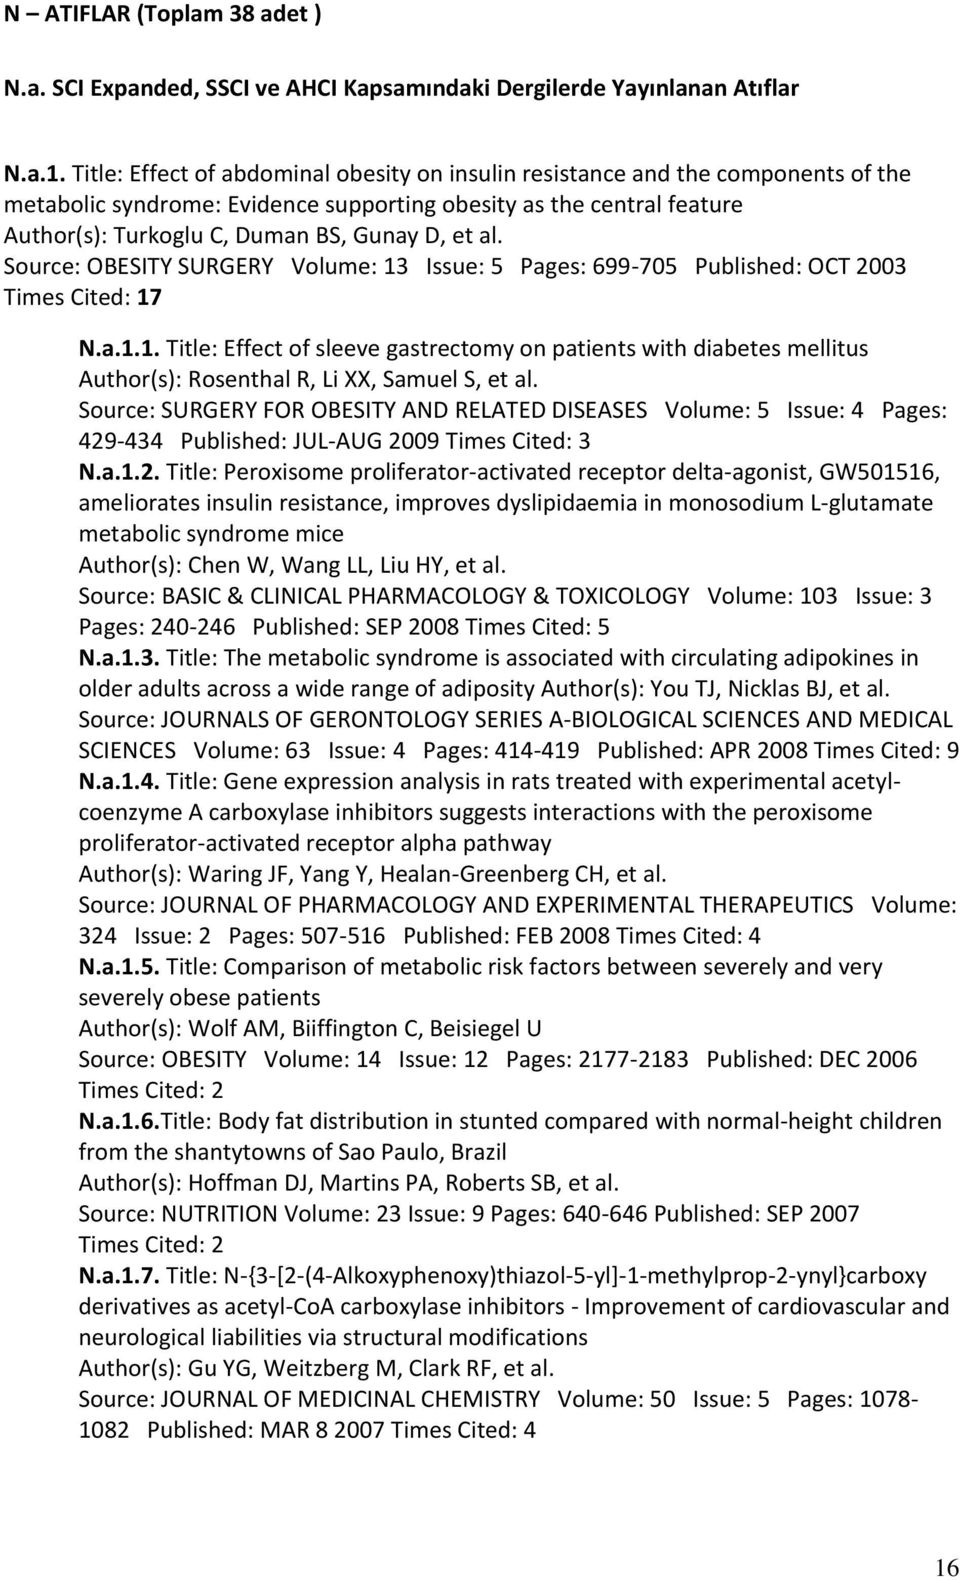 al. Source: OBESITY SURGERY Volume: 13 Issue: 5 Pages: 699-705 Published: OCT 2003 Times Cited: 17 N.a.1.1. Title: Effect of sleeve gastrectomy on patients with diabetes mellitus Author(s): Rosenthal R, Li XX, Samuel S, et al.